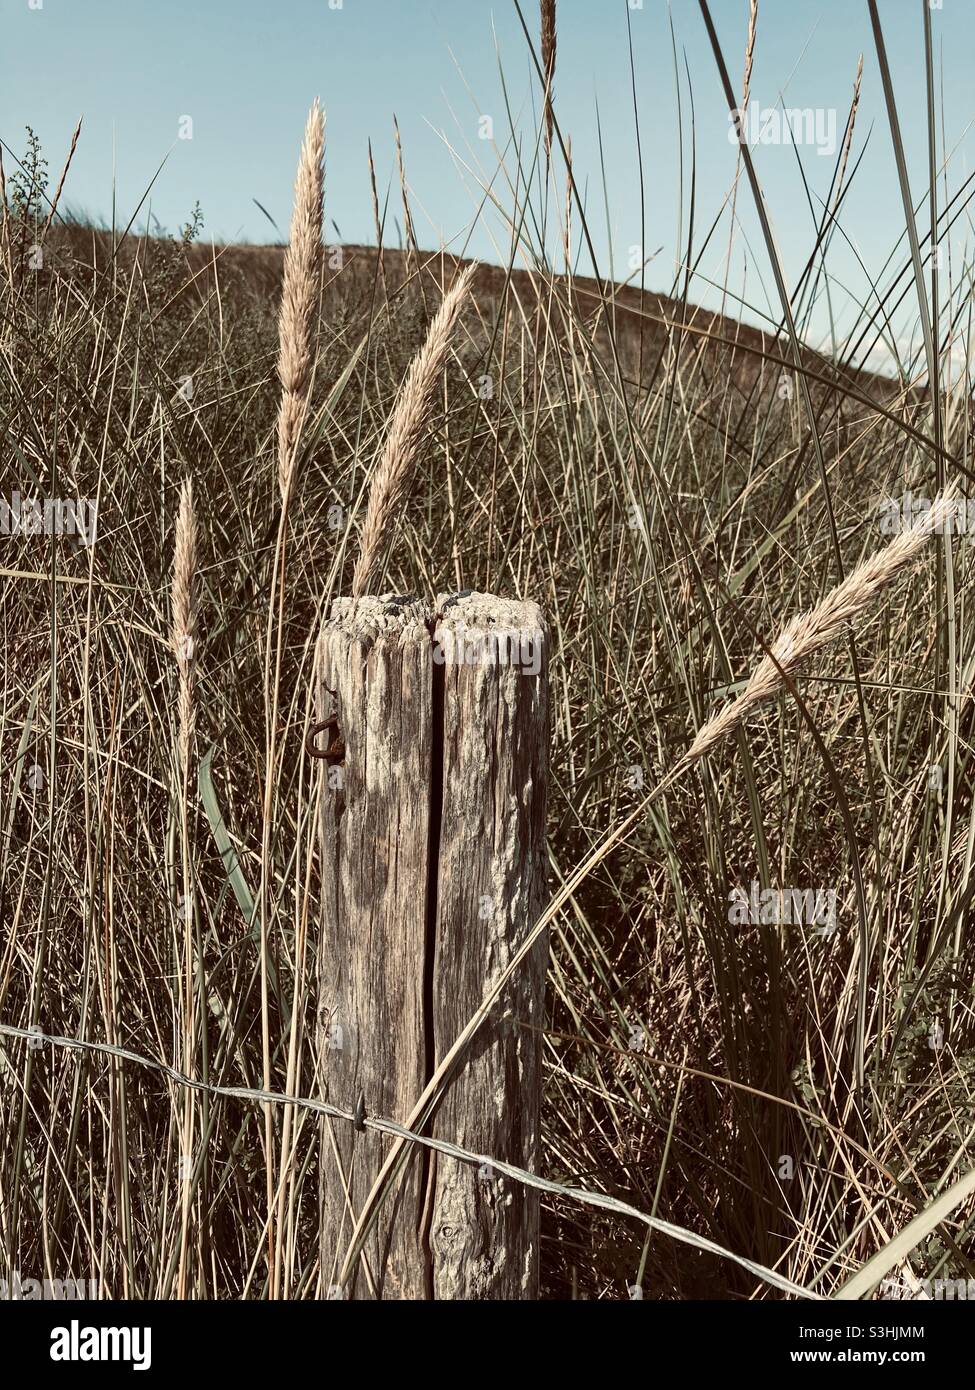 a weathered old wooden fence post is overgrown with grasses against a blue sky Stock Photo